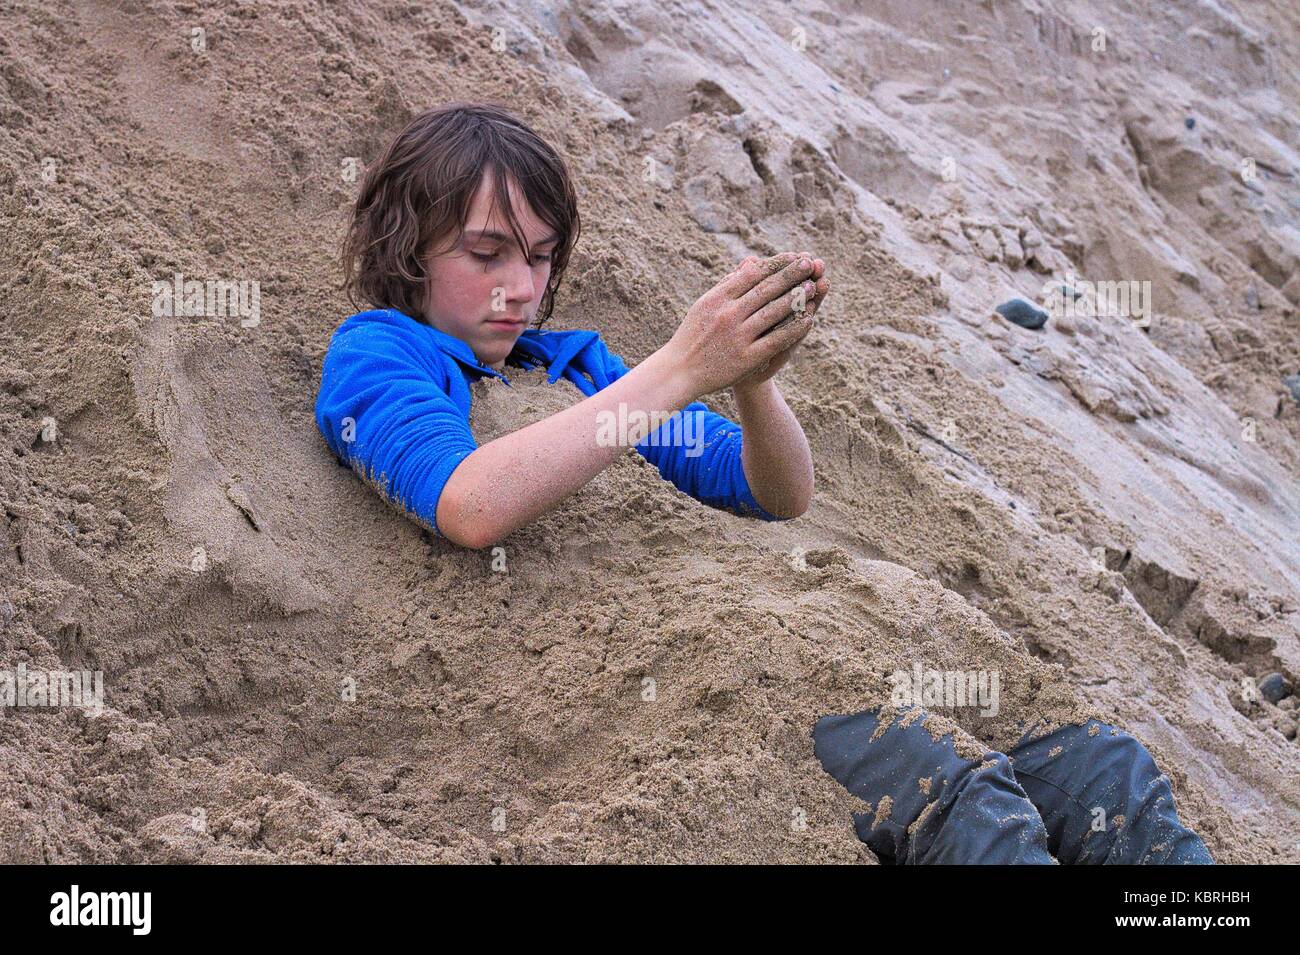 Young teenage boy covering himself in sand while fully dressed, winter at Marengo beach, Vic, Australia. Stock Photo